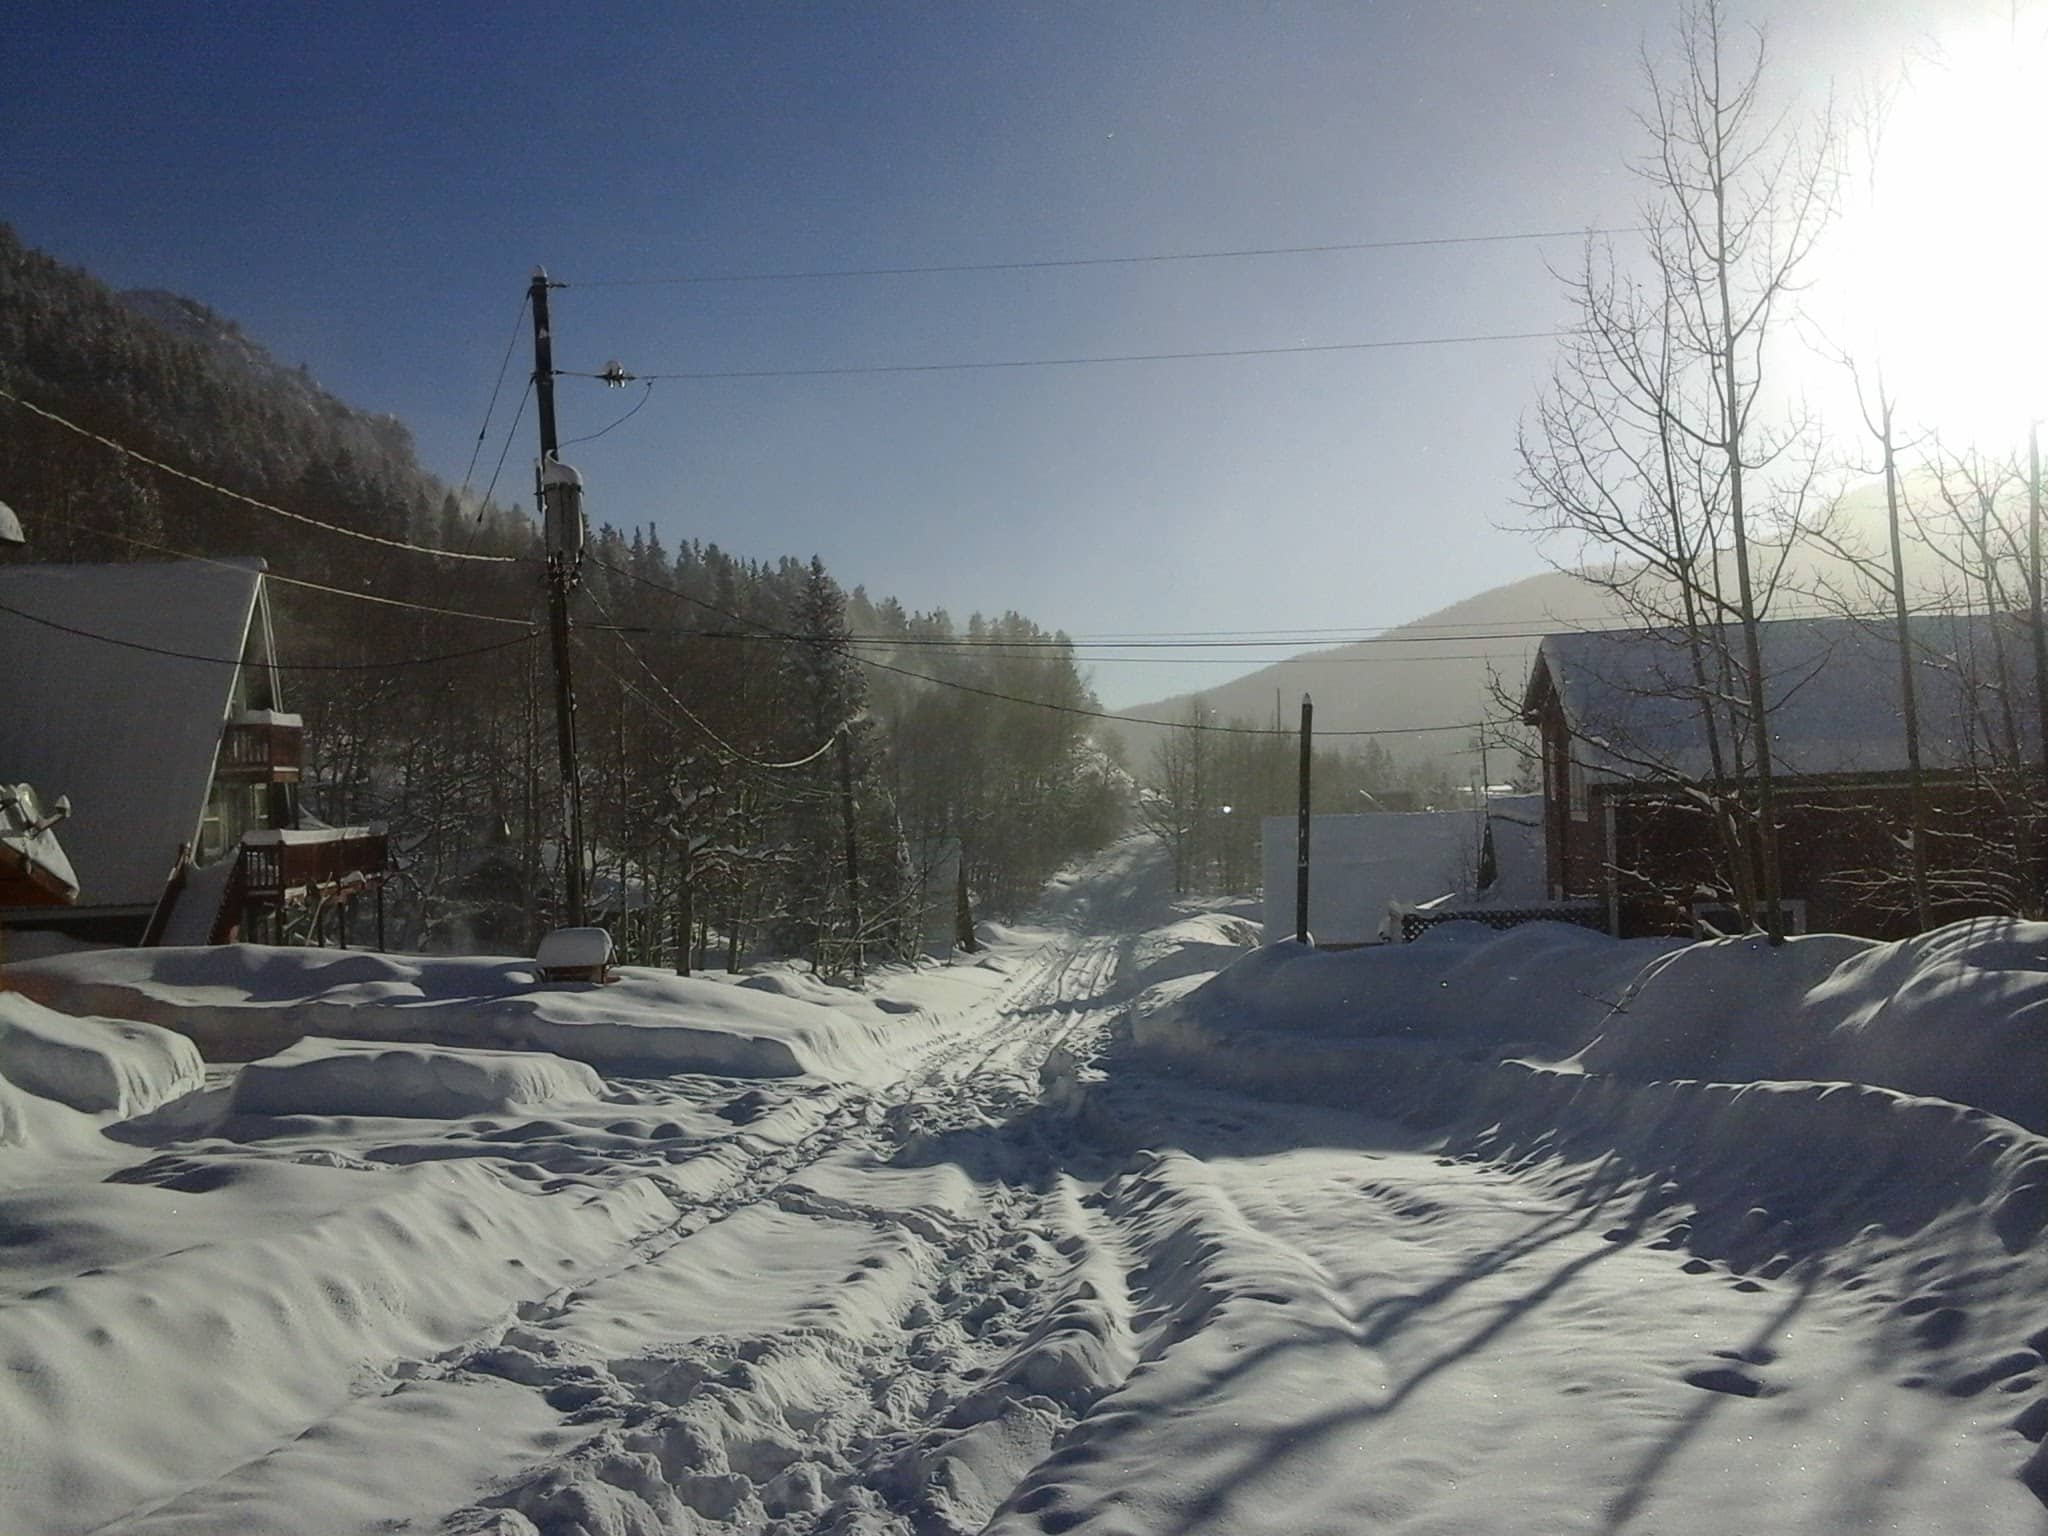 Beautiful sunny morning with 40 inches of fresh snow covering a road with cabins on each side.